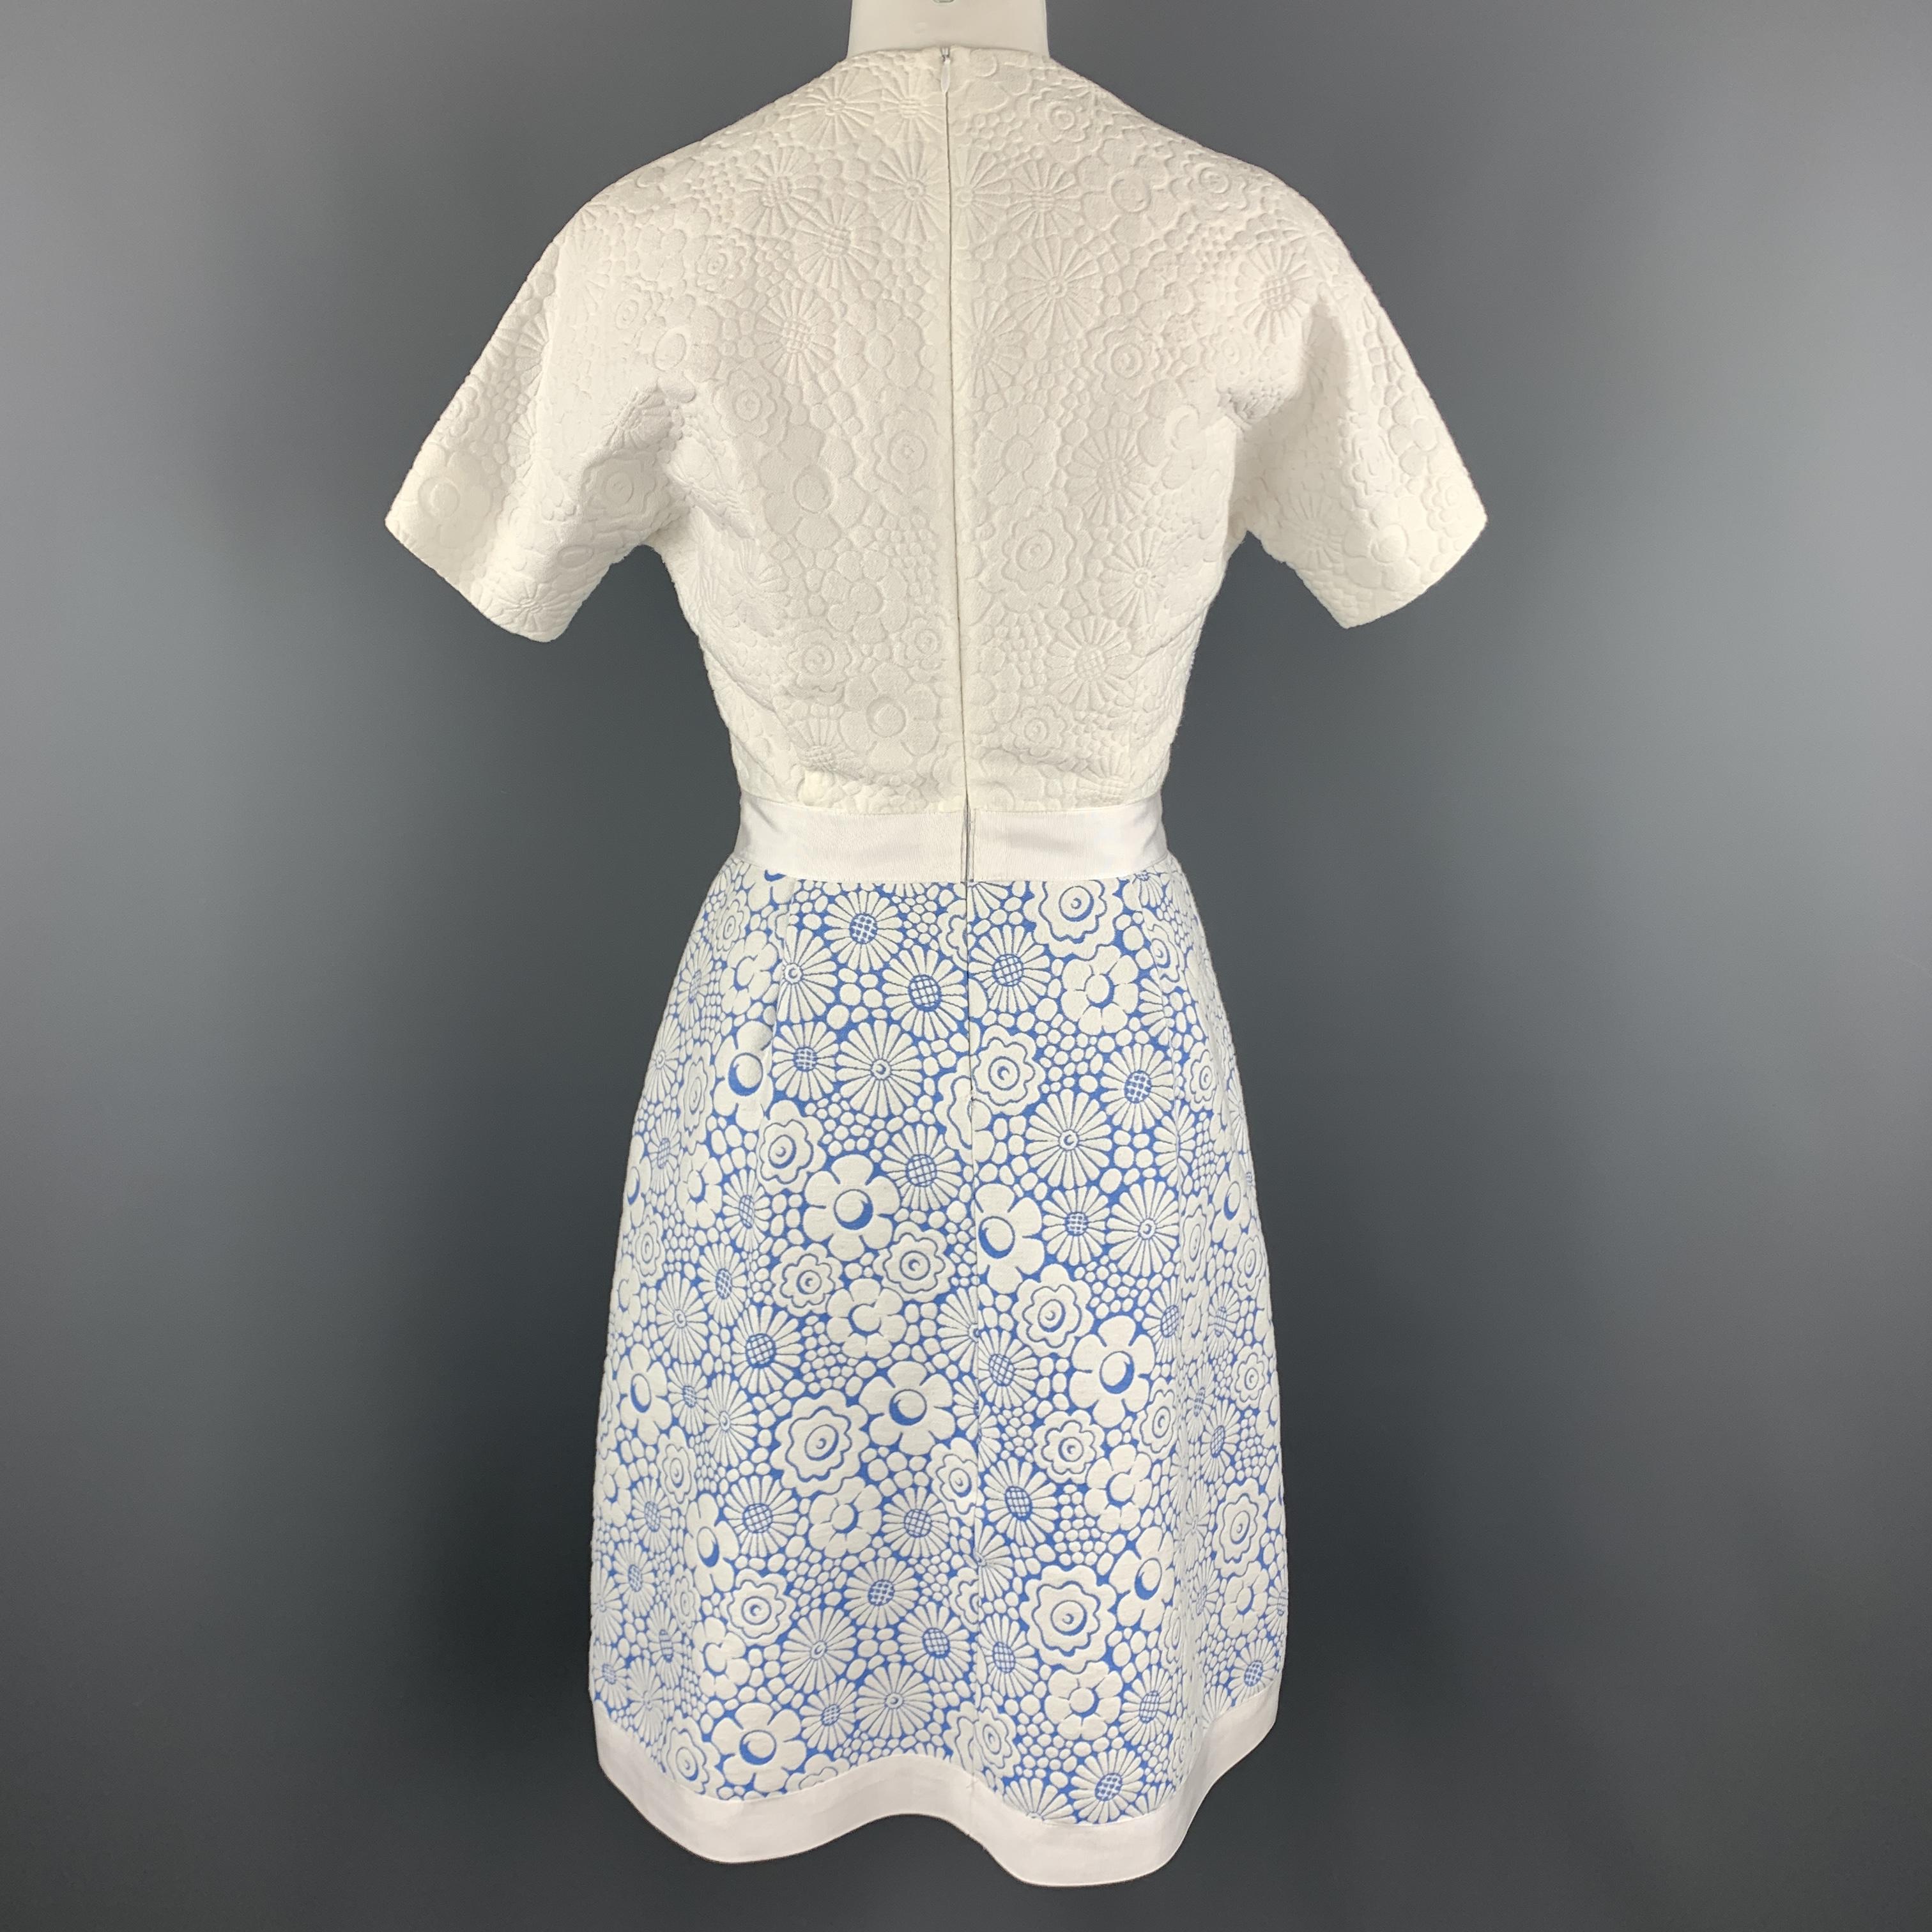 THOM BROWNE Size 2 White Floral Textured Blue Panel Structured Dress Spring 2013 4